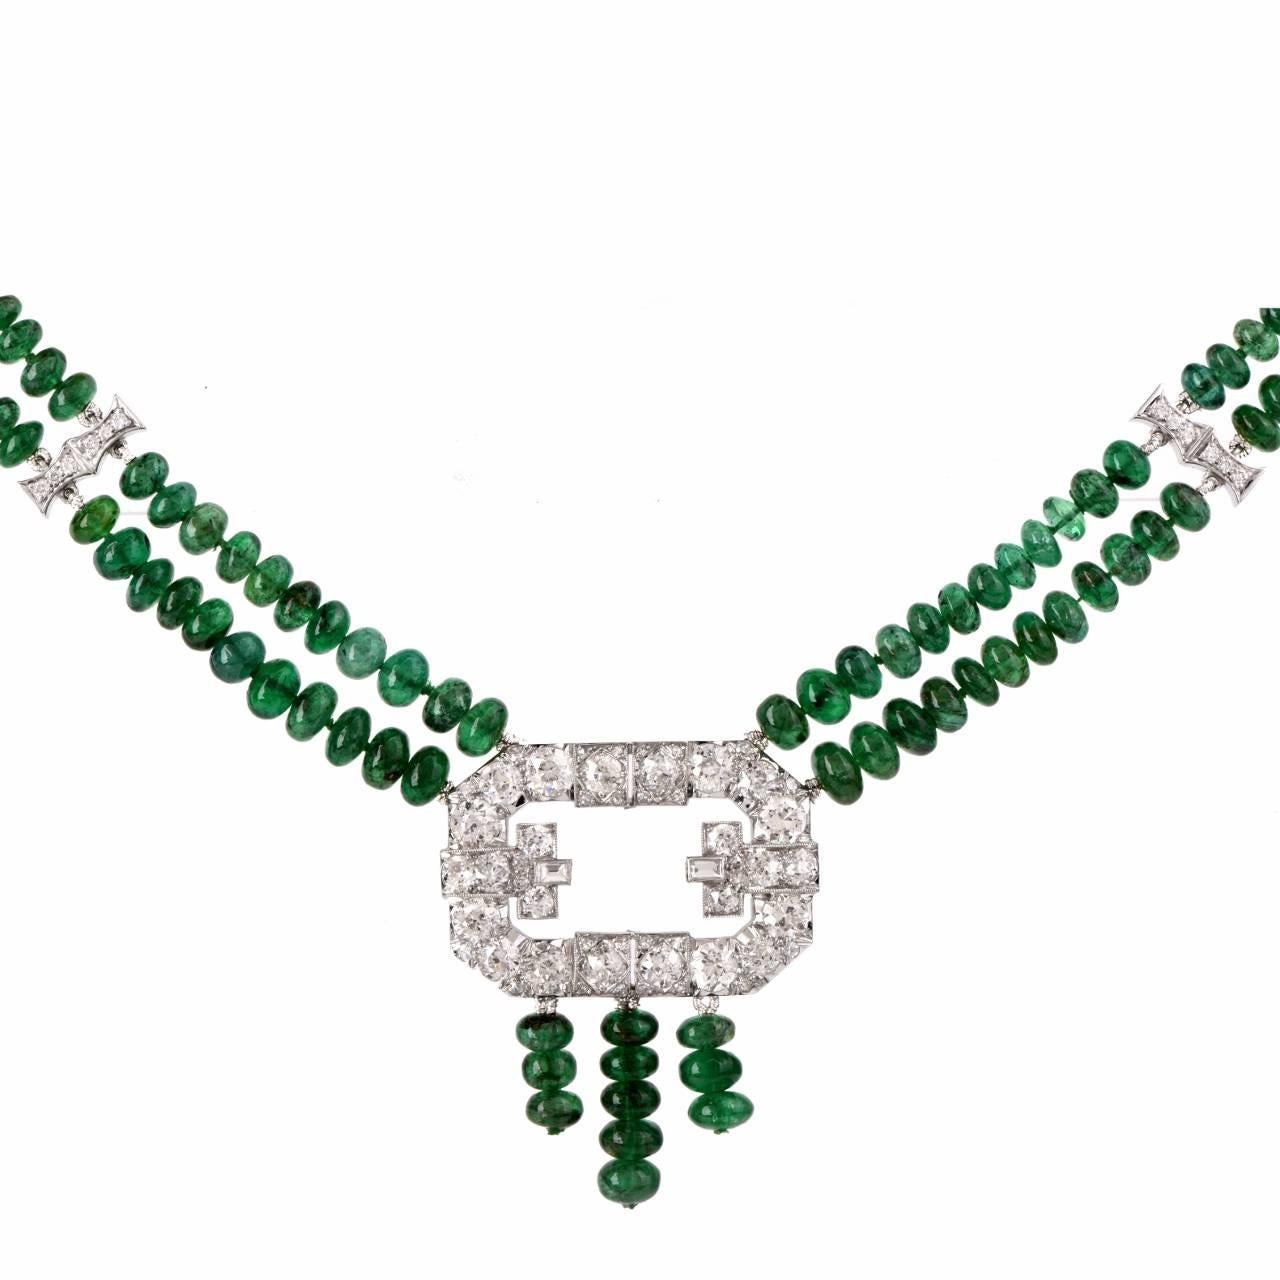 This absorbingly stunning vintage necklace with two strands of genuine emerald beads and an octagonal diamond encrusted decor is crafted in platinum, weighing 42.2 grams and measuring 19